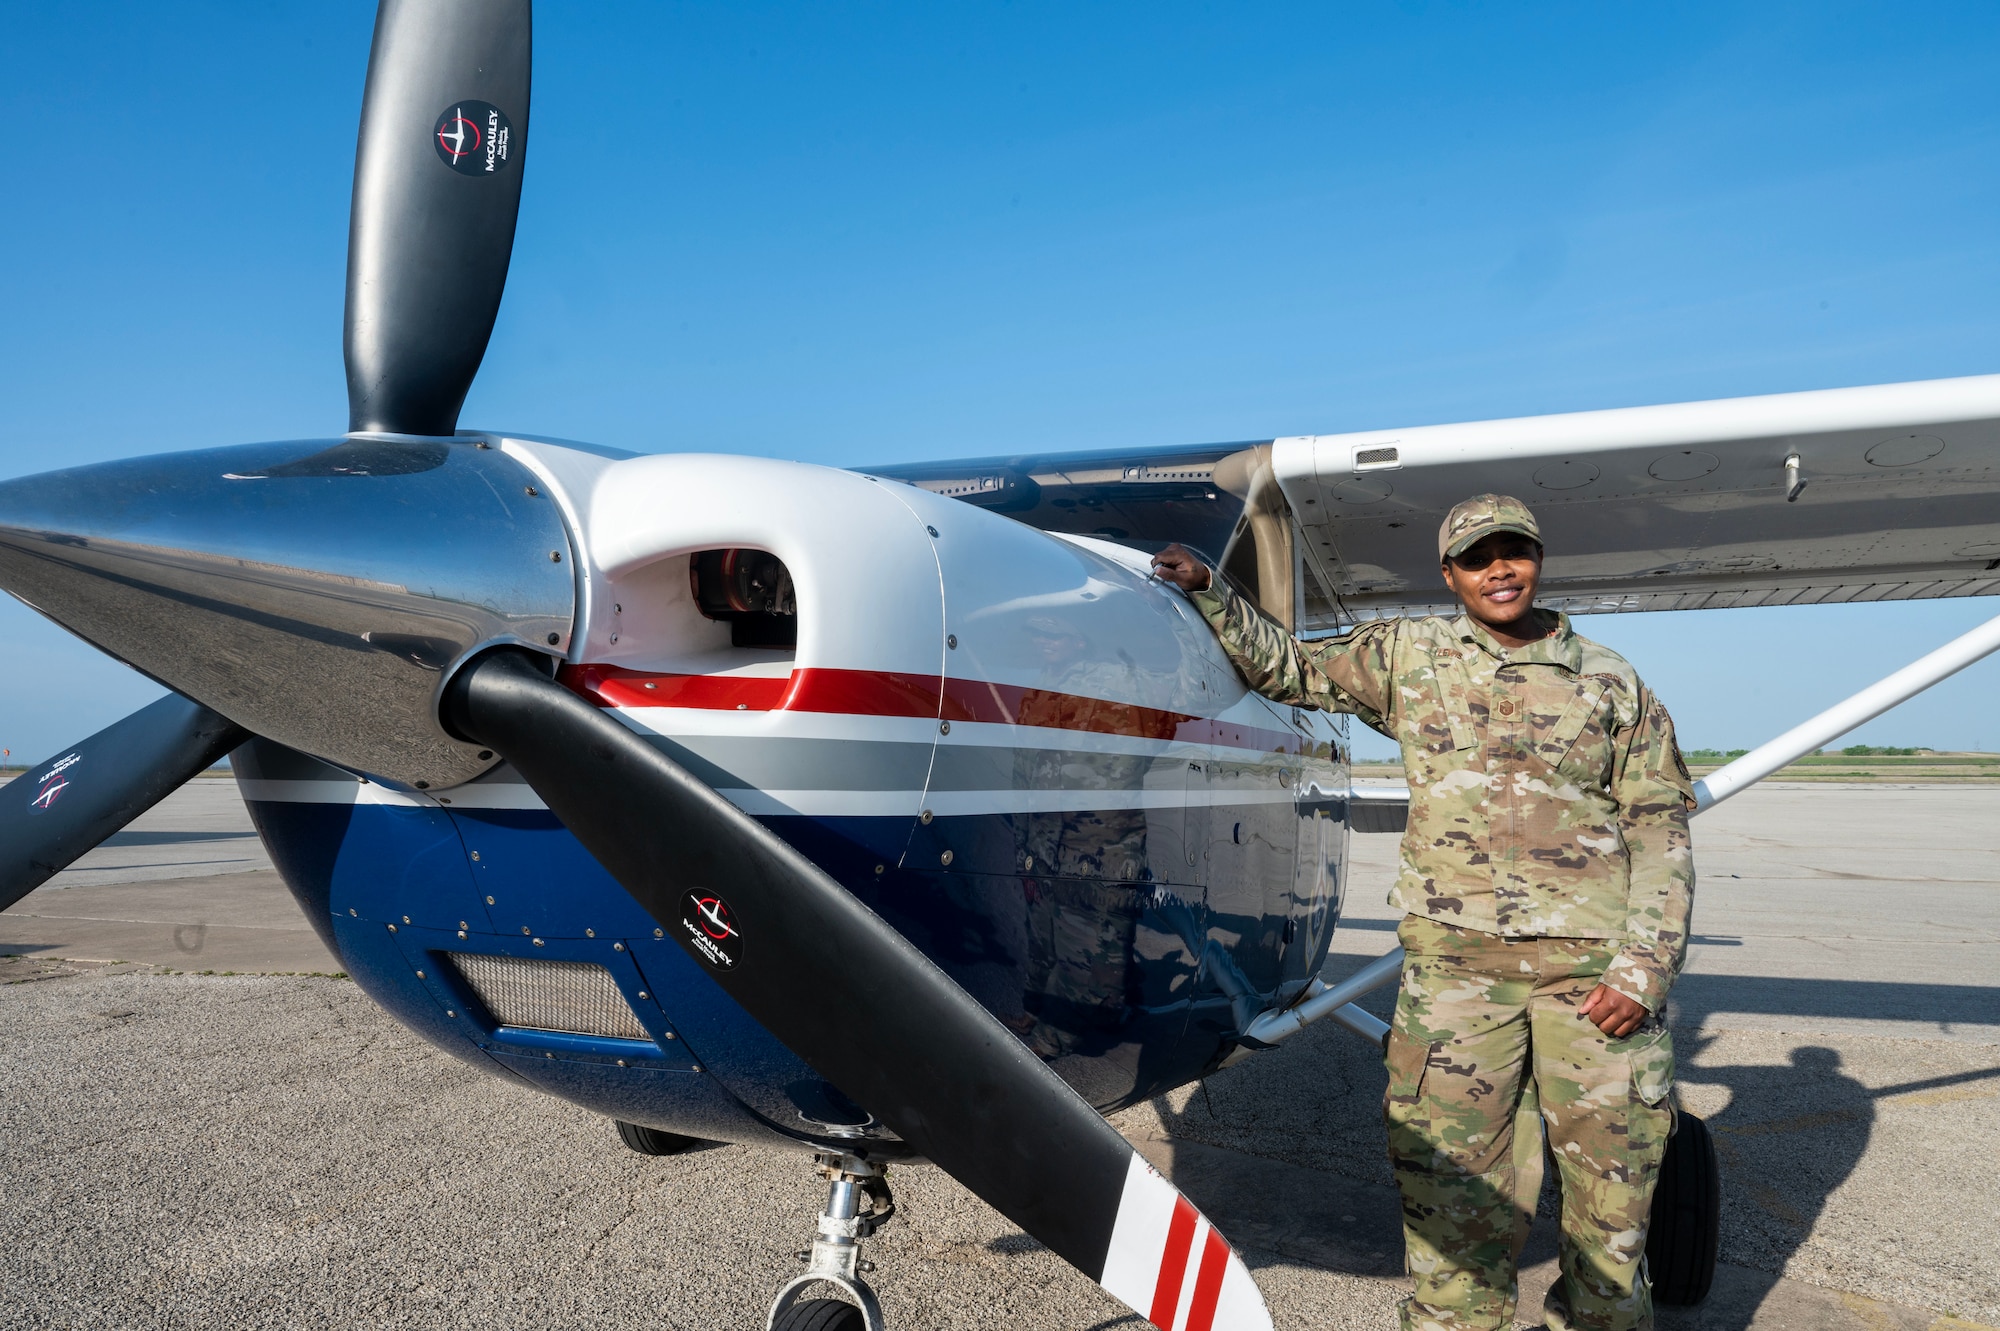 Master Sgt. Careen Lewis, 7th Equipment Maintenance Squadron fabrication flight superintendent, poses for a photo after conducting a pre-flight check of a Cessna 182T